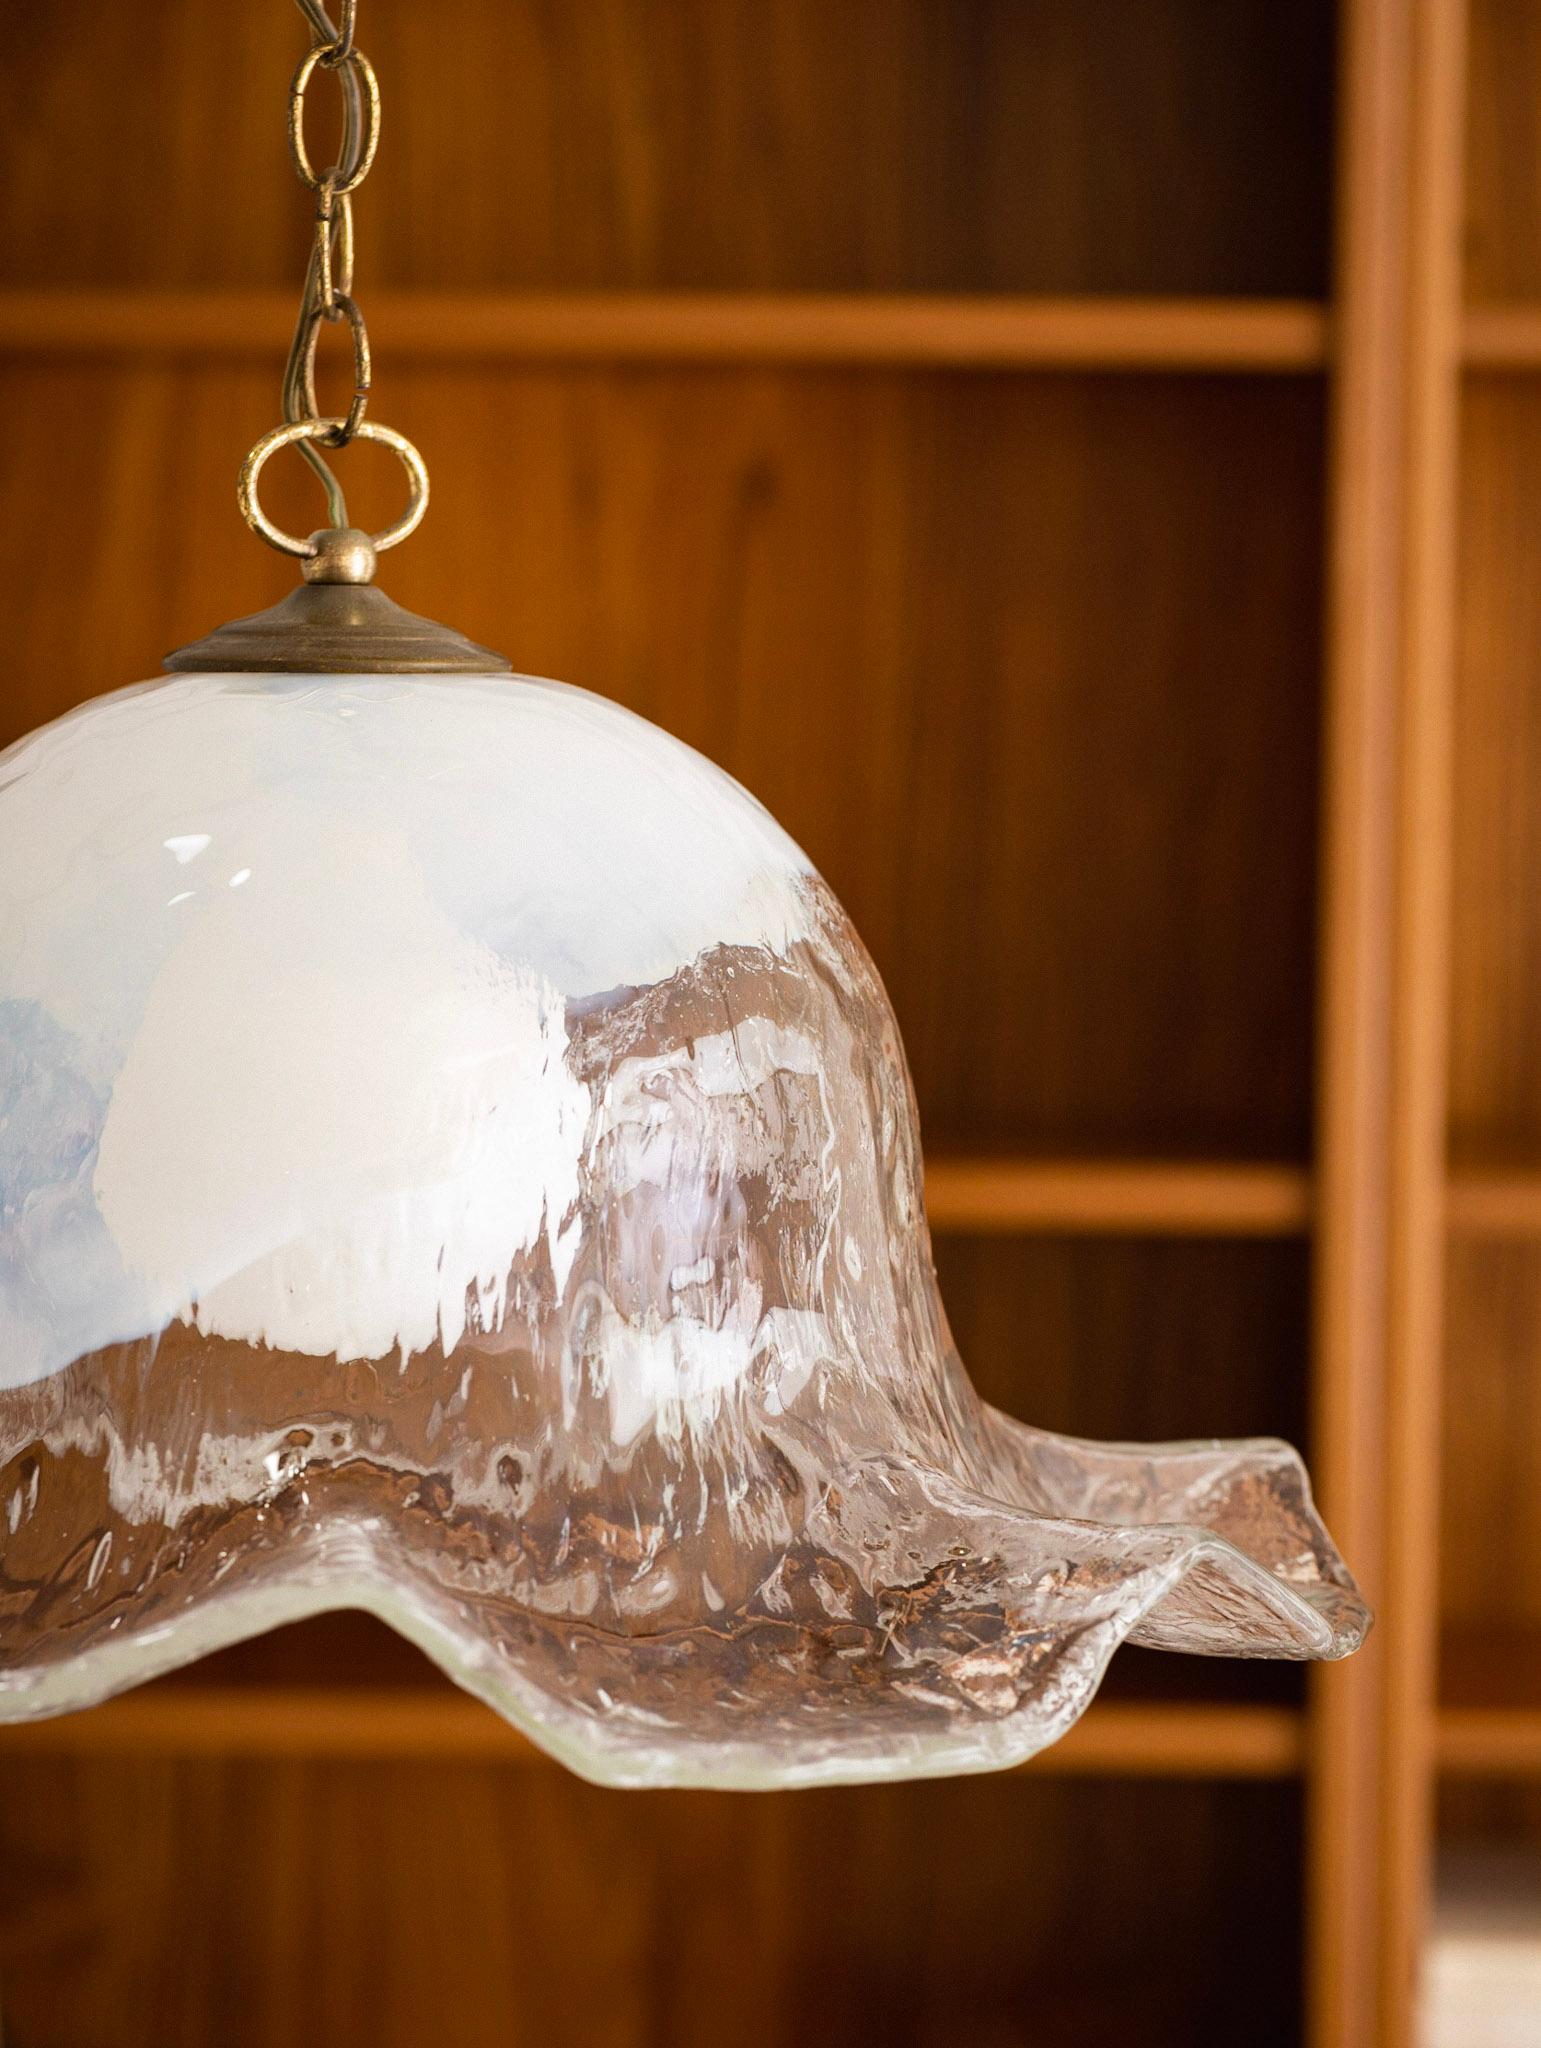 Sculptural hand-blown Murano glass pendant lamp, attributed to Mazzega Murano. Asymmetrical white coloring in the glass. Hardwire, can be rewired at your own discretion. Comes with brass ceiling canopy and brass chain, Measures: approximately 12”